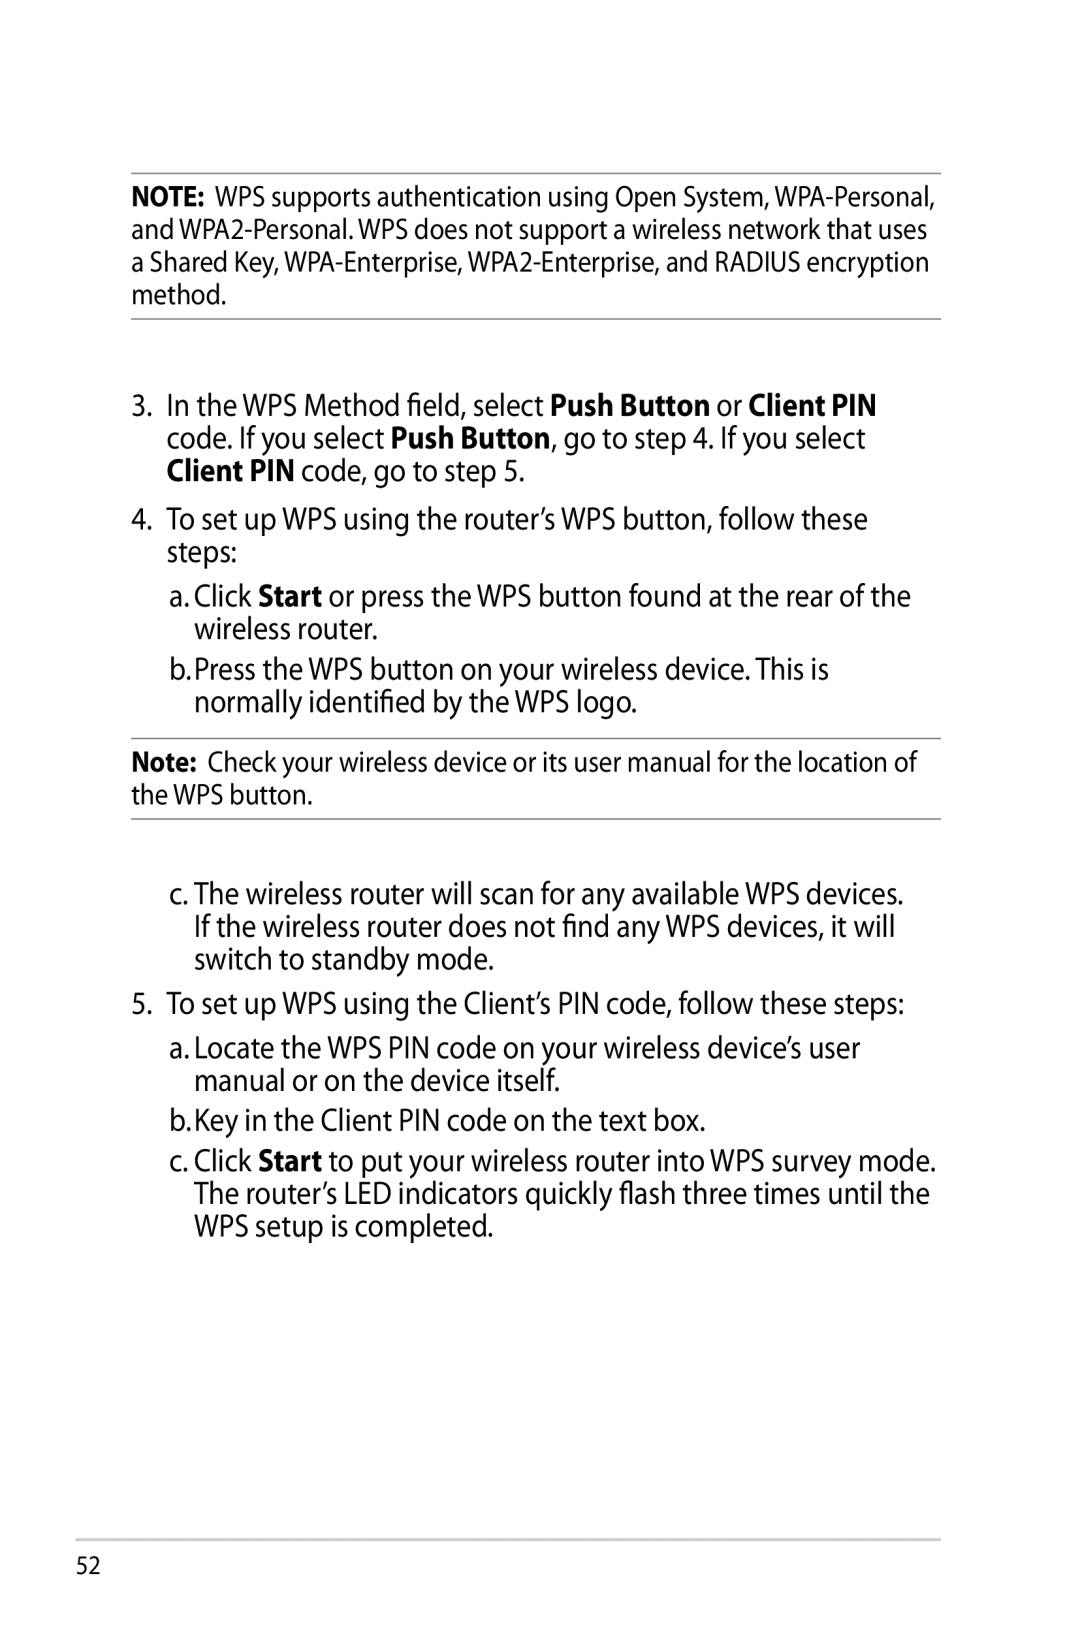 Asus RTAC68U manual To set up WPS using the router’s WPS button, follow these steps 